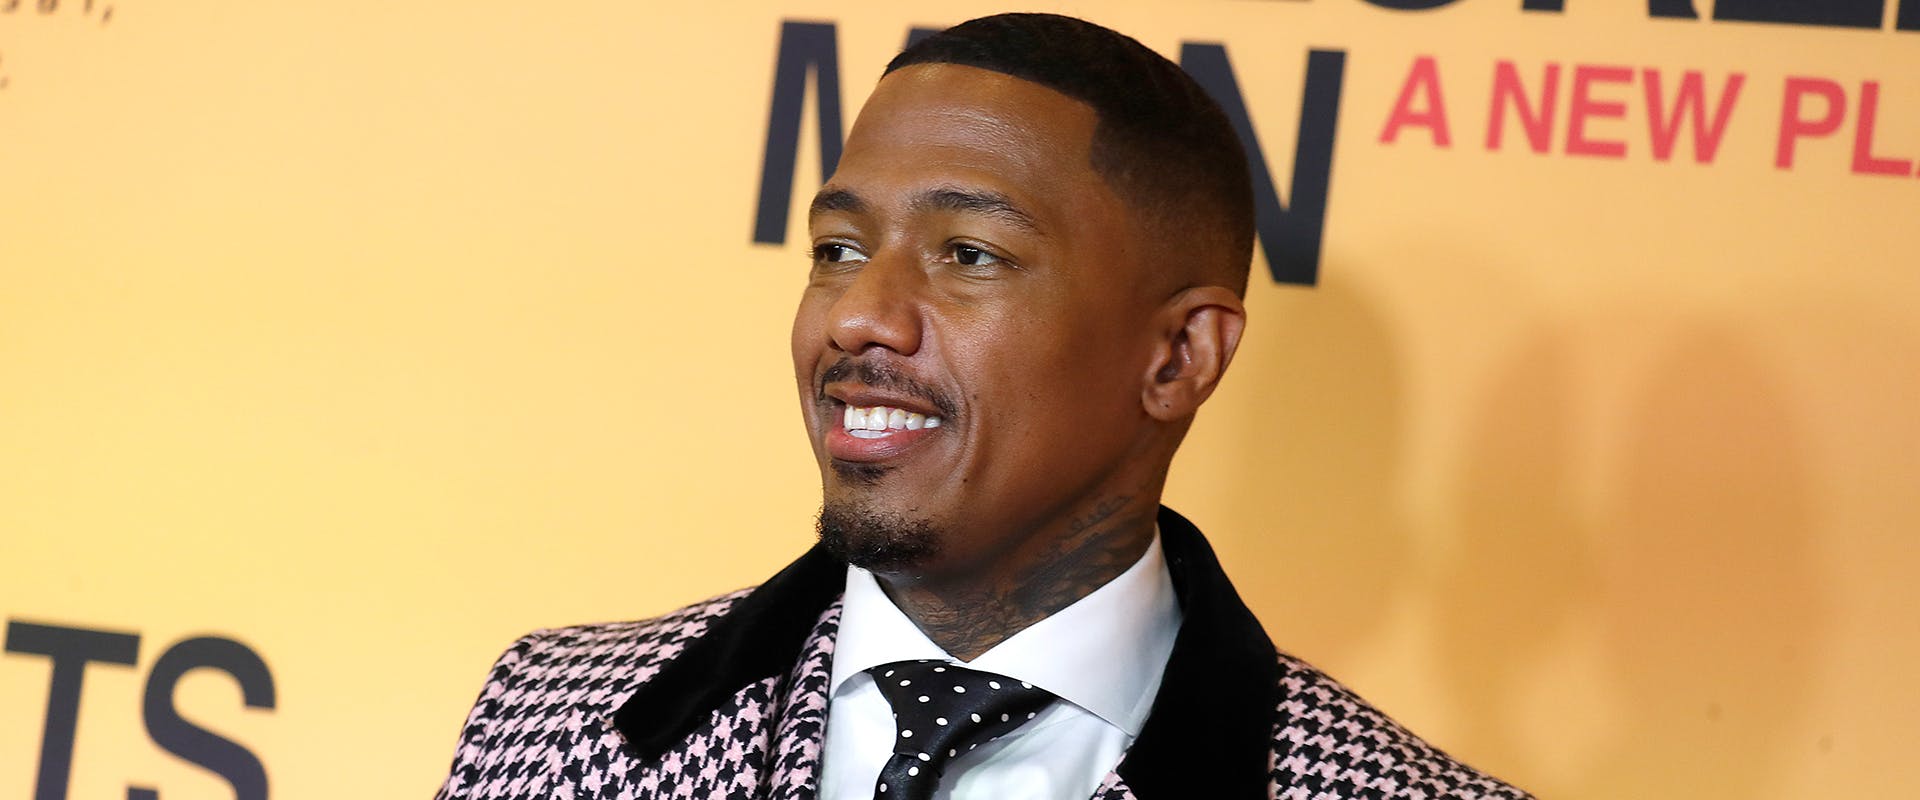 Nick Cannon attends "Thoughts Of A Colored Man" opening night at Golden Theatre on October 13, 2021 in New York City.